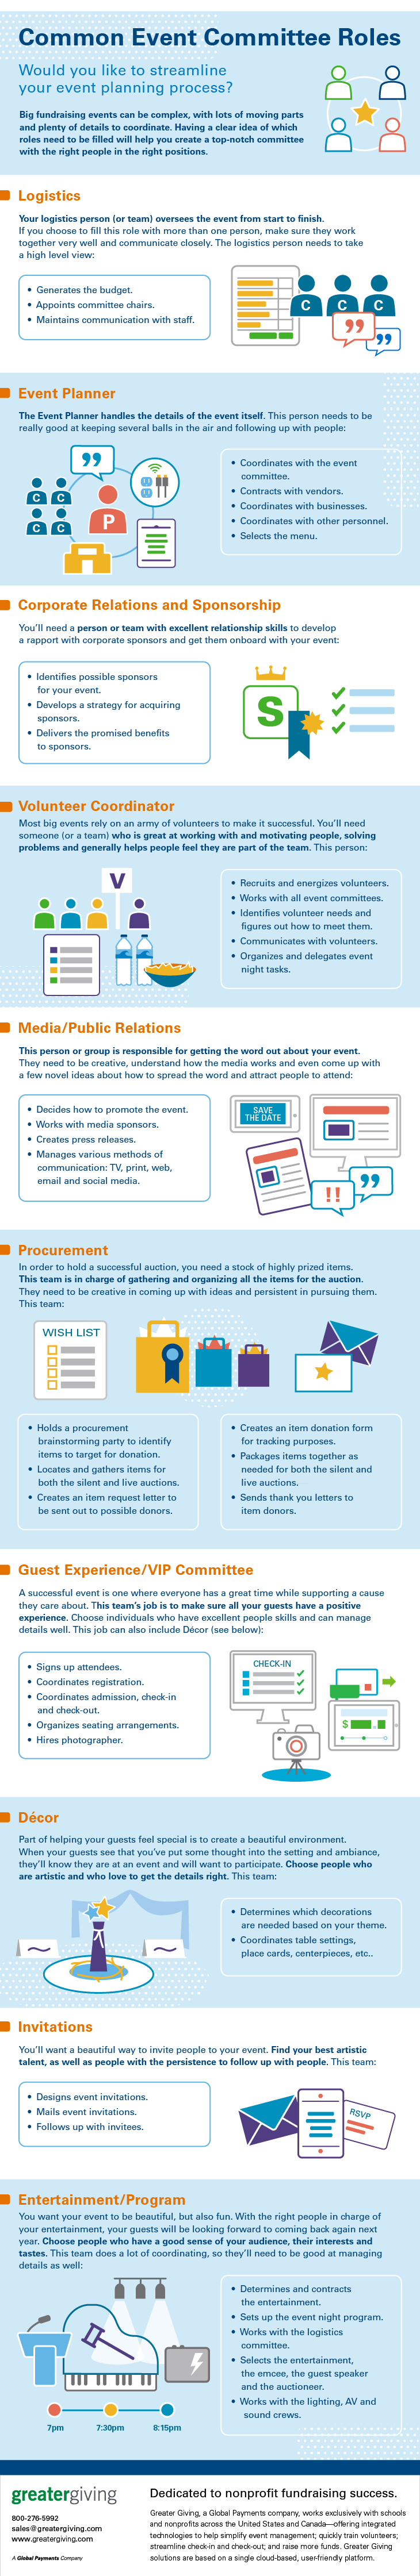 Common Event Committee Roles [INFOGRAPHIC]